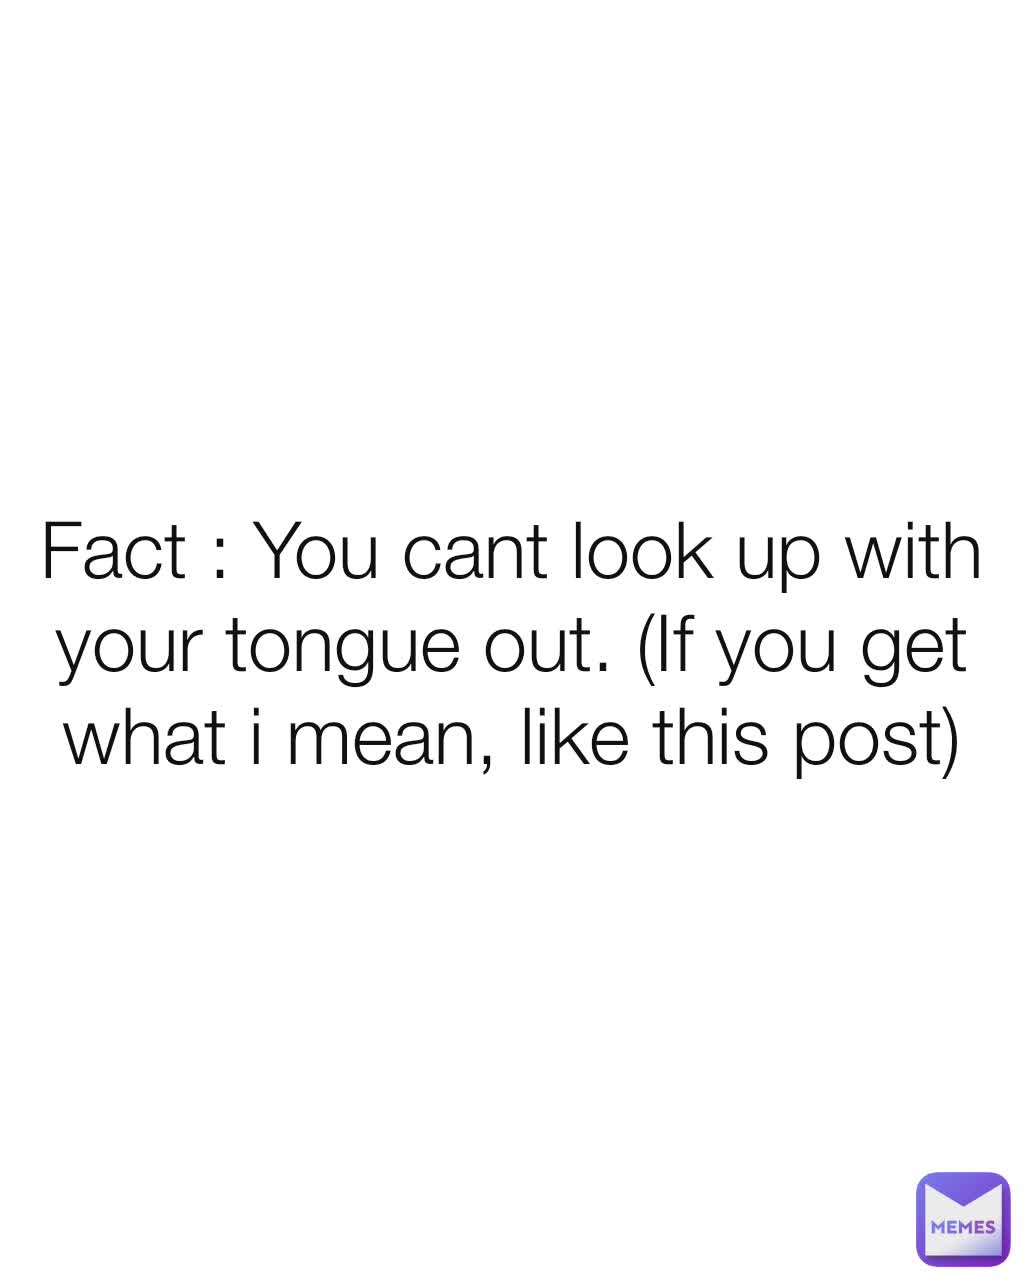 Fact : You cant look up with your tongue out. (If you get what i mean, like this post)